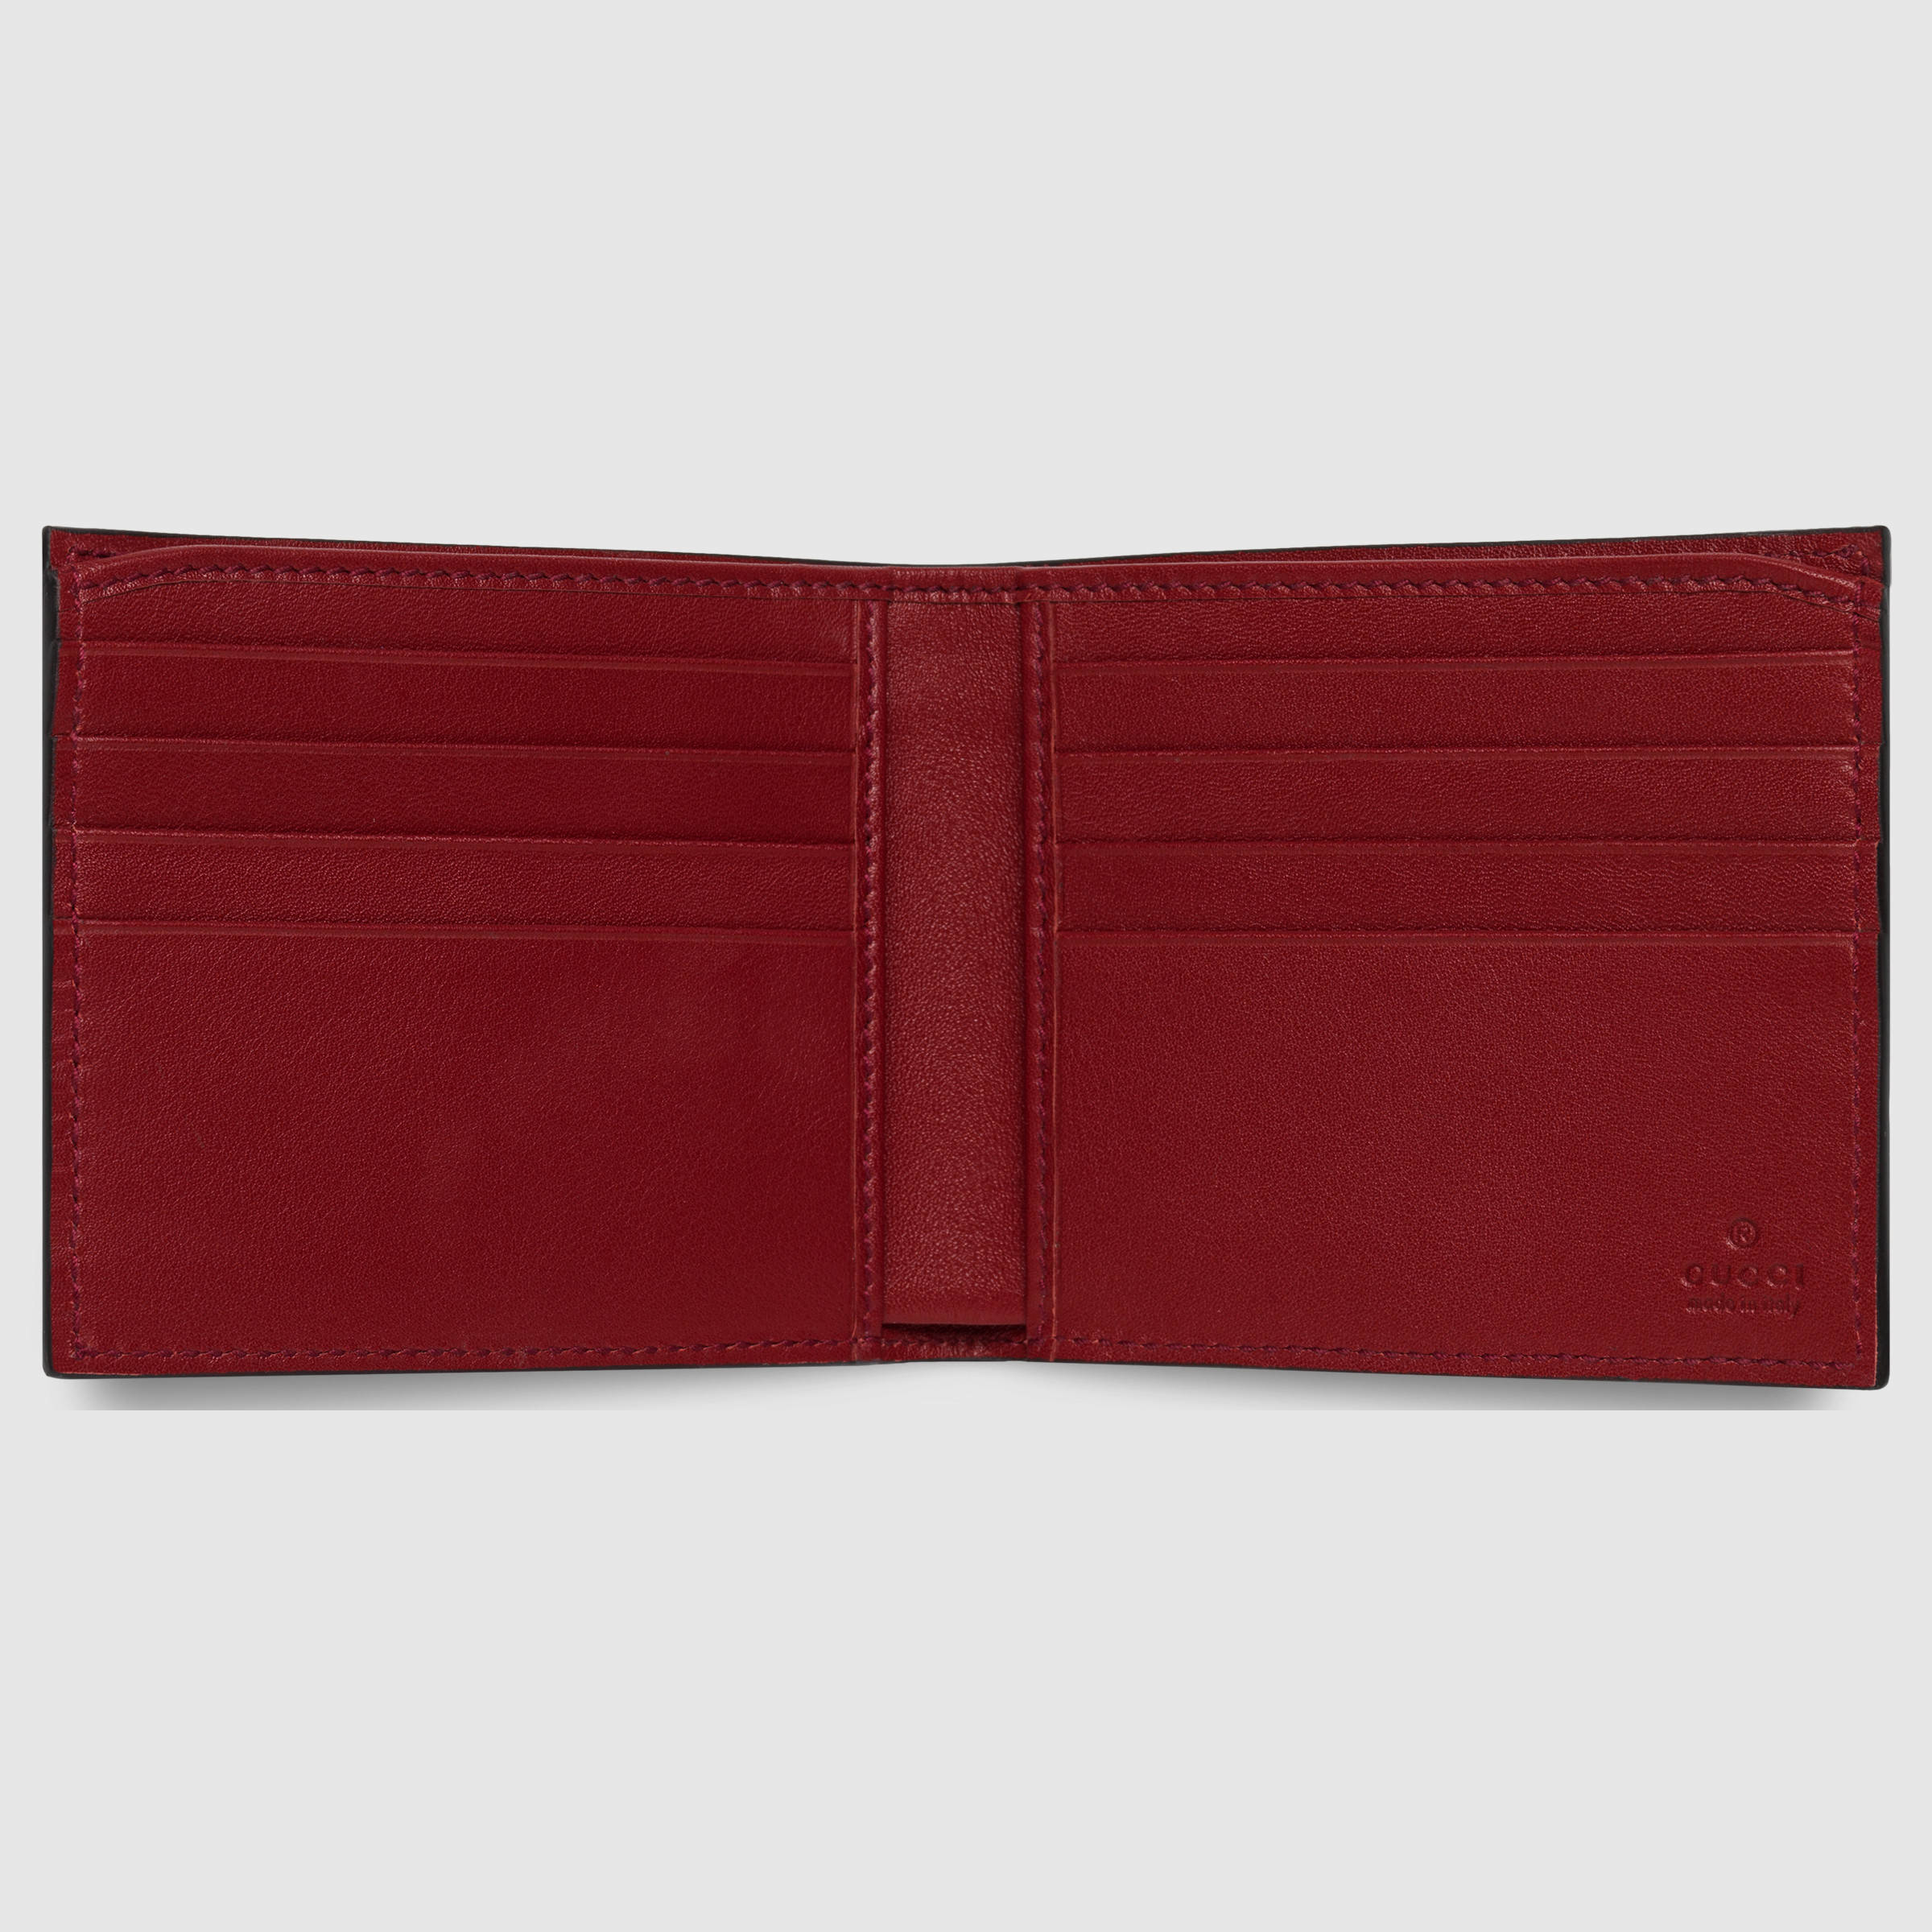 Gucci Ayers Snakeskin Wallet in Red for Men - Lyst